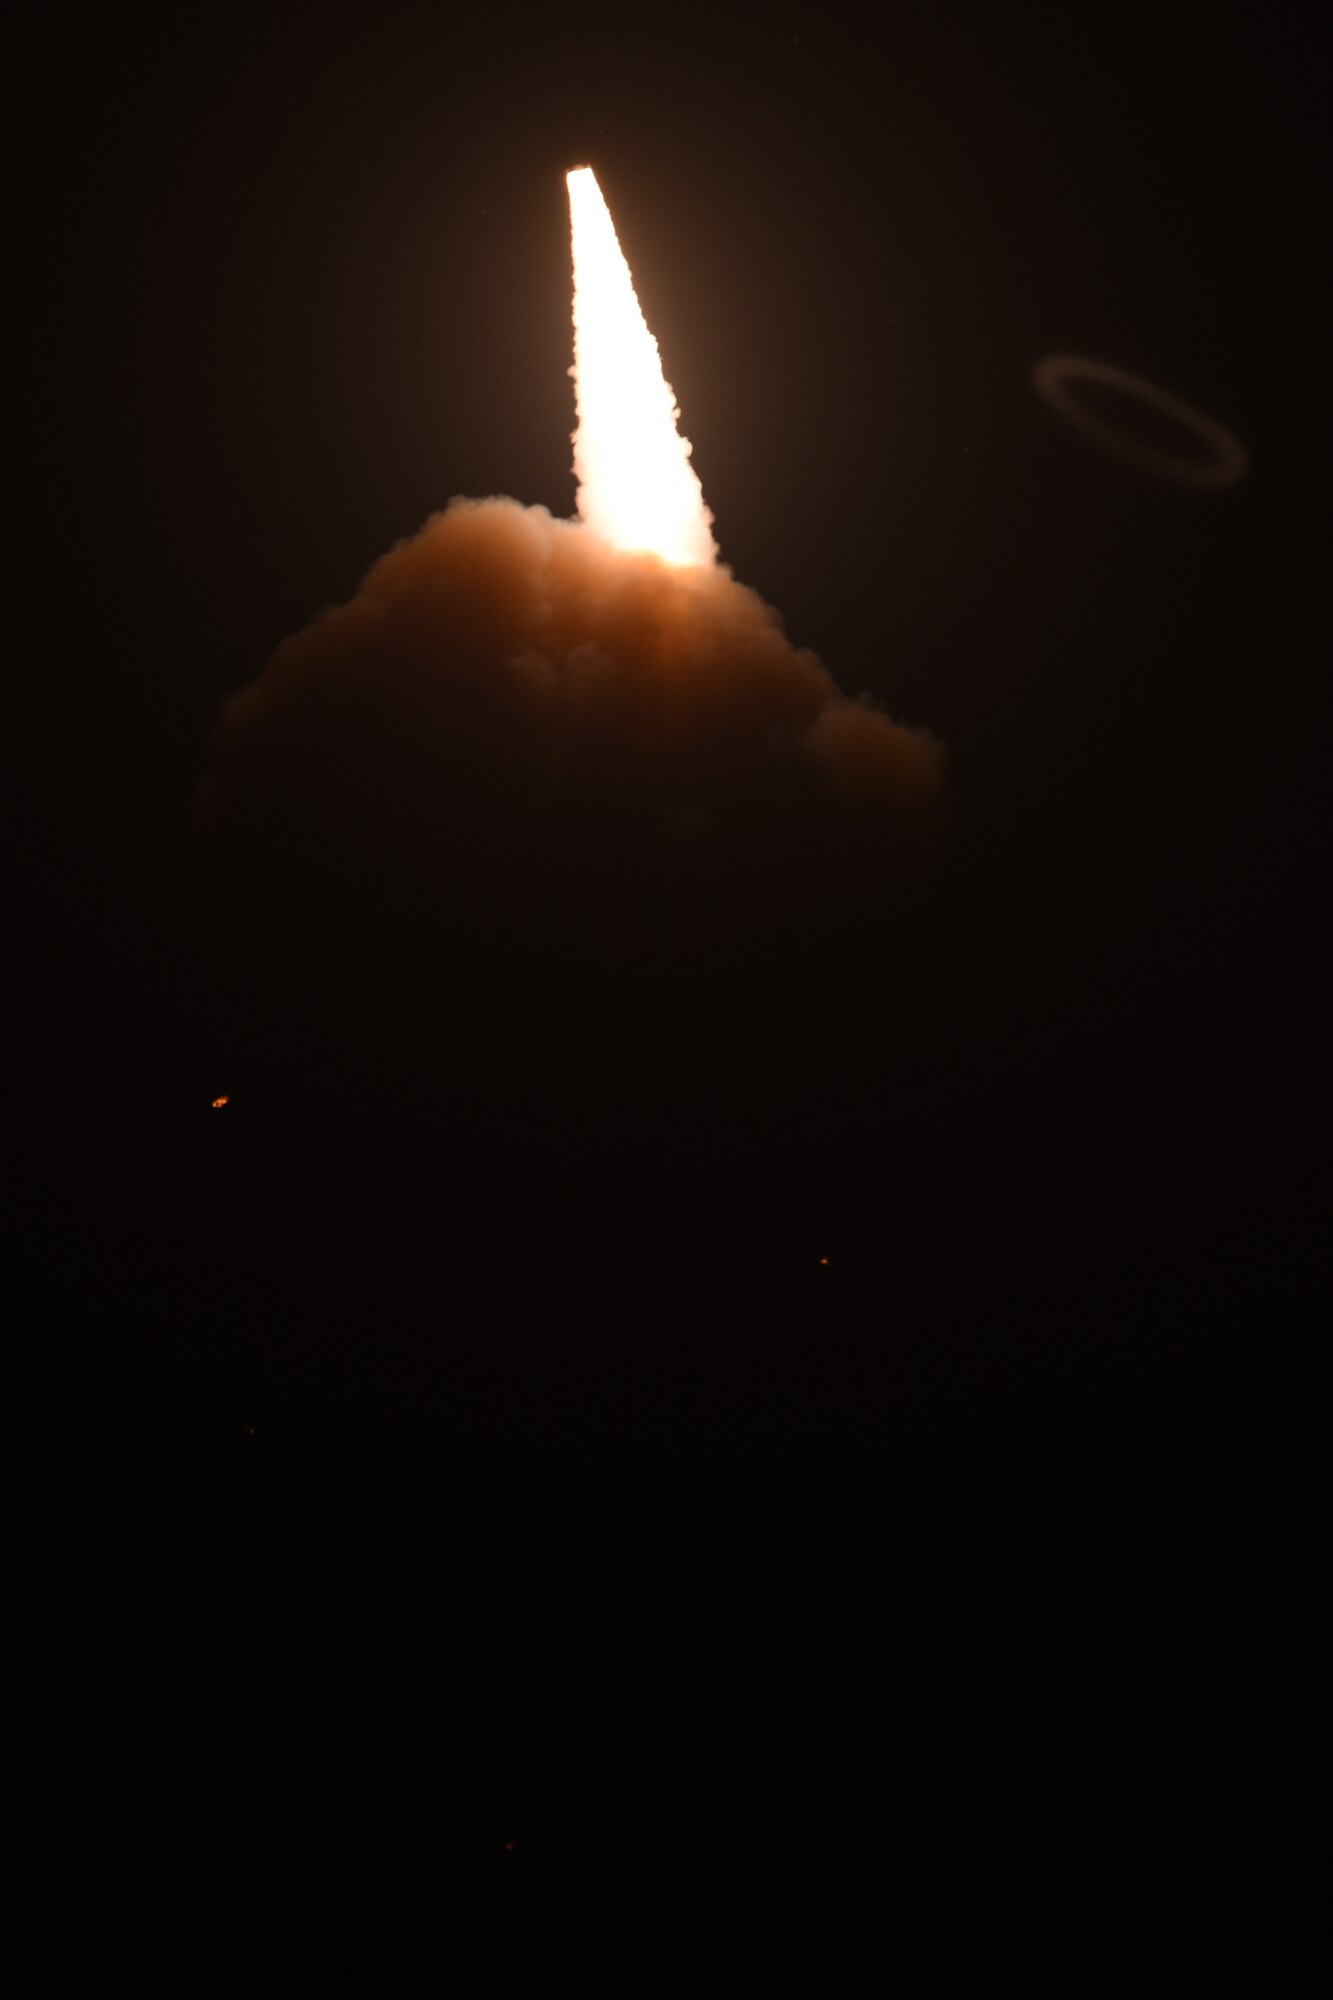 An unarmed Minuteman III intercontinental ballistic missile launches during an operational test at 2:10 a.m. Pacific Daylight Time Monday, Sept. 5, 2016, Vandenberg Air Force Base, Calif. (U.S. Air Force photo by Michael Peterson)  